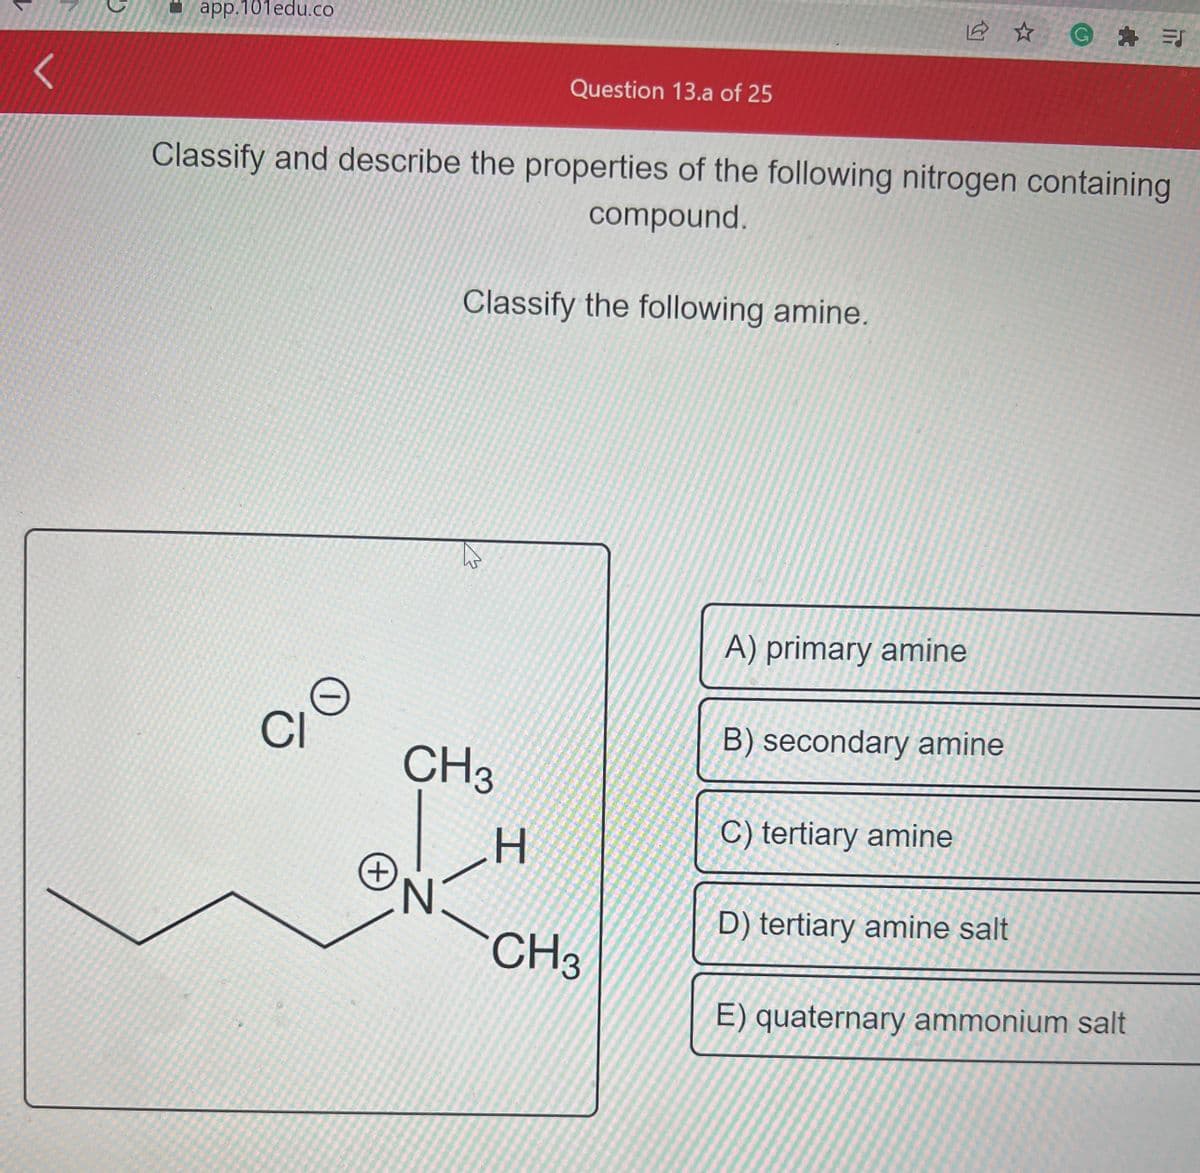 <
app.101edu.co
Classify and describe the properties of the following nitrogen containing
compound.
O
CI
O
+
Question 13.a of 25
CH3
N
Classify the following amine.
H
CH3
A) primary amine
B) secondary amine
C) tertiary amine
@=J
D) tertiary amine salt
E) quaternary ammonium salt